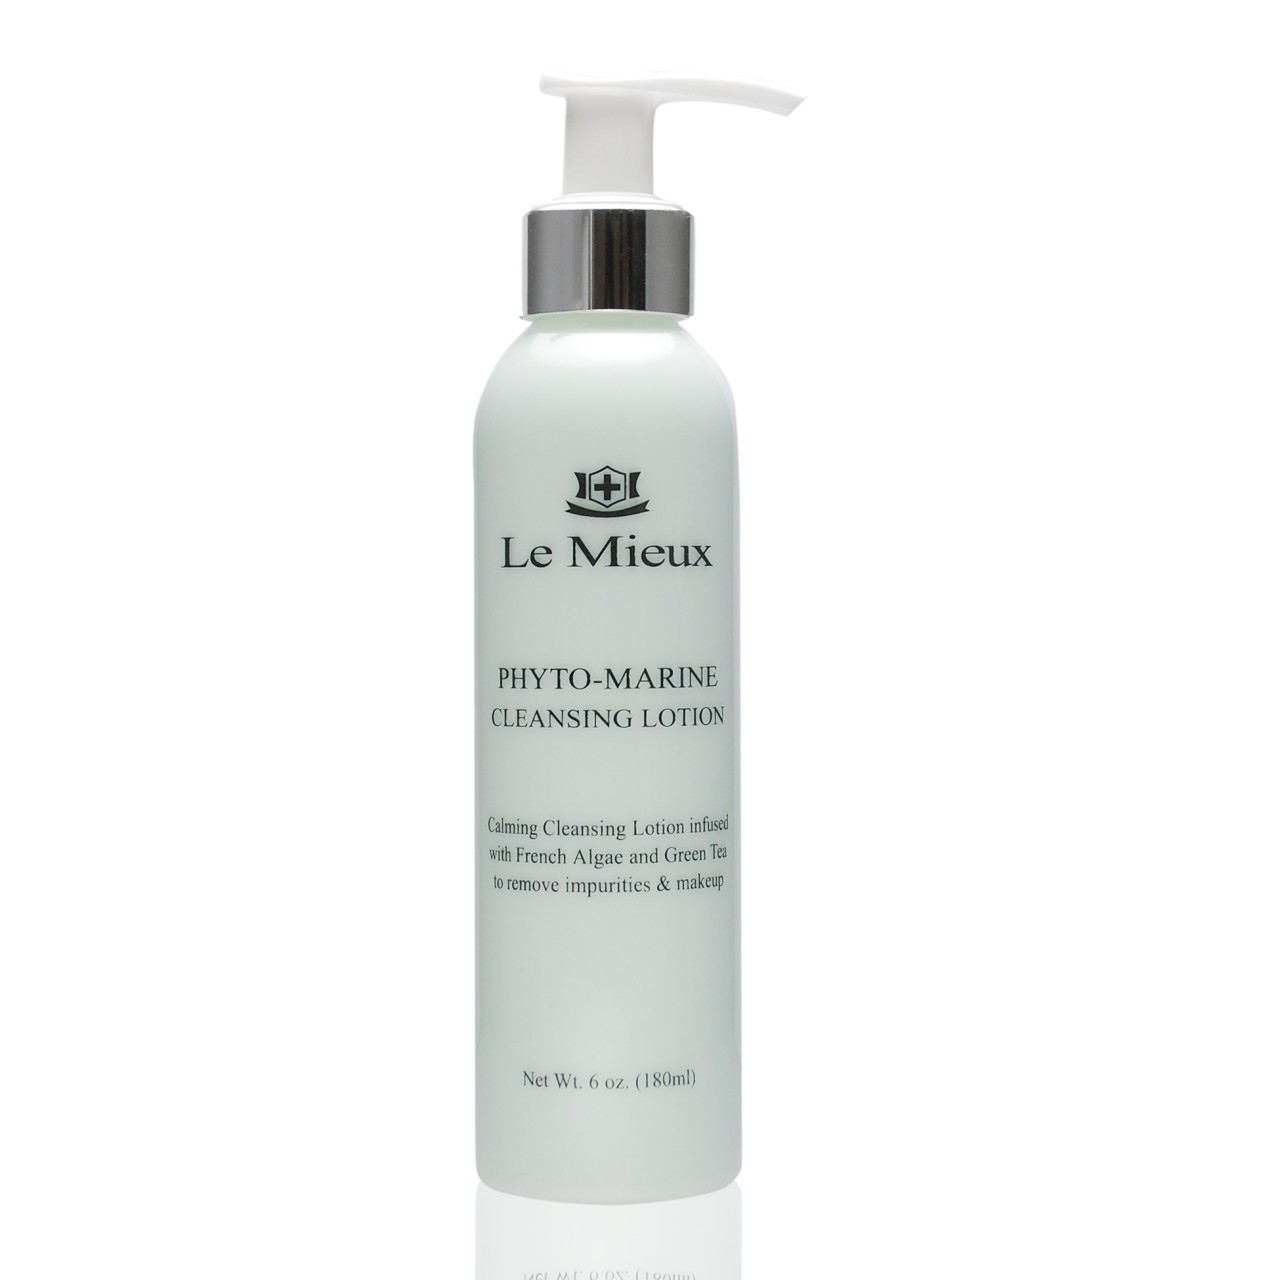 Le Mieux Phyto-Marine Cleansing Lotion